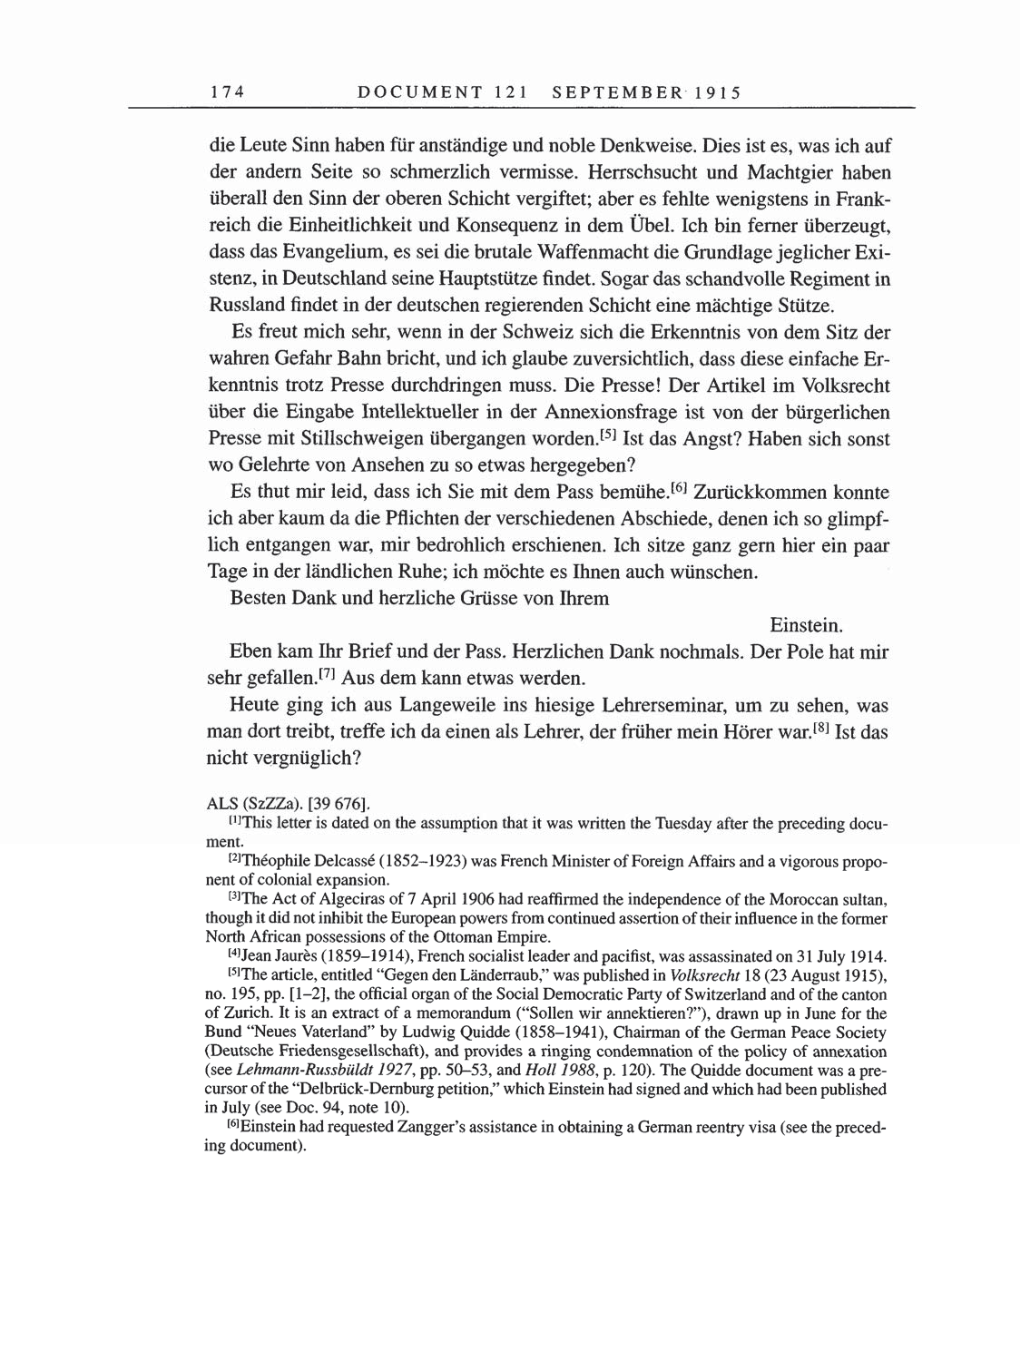 Volume 8, Part A: The Berlin Years: Correspondence 1914-1917 page 174